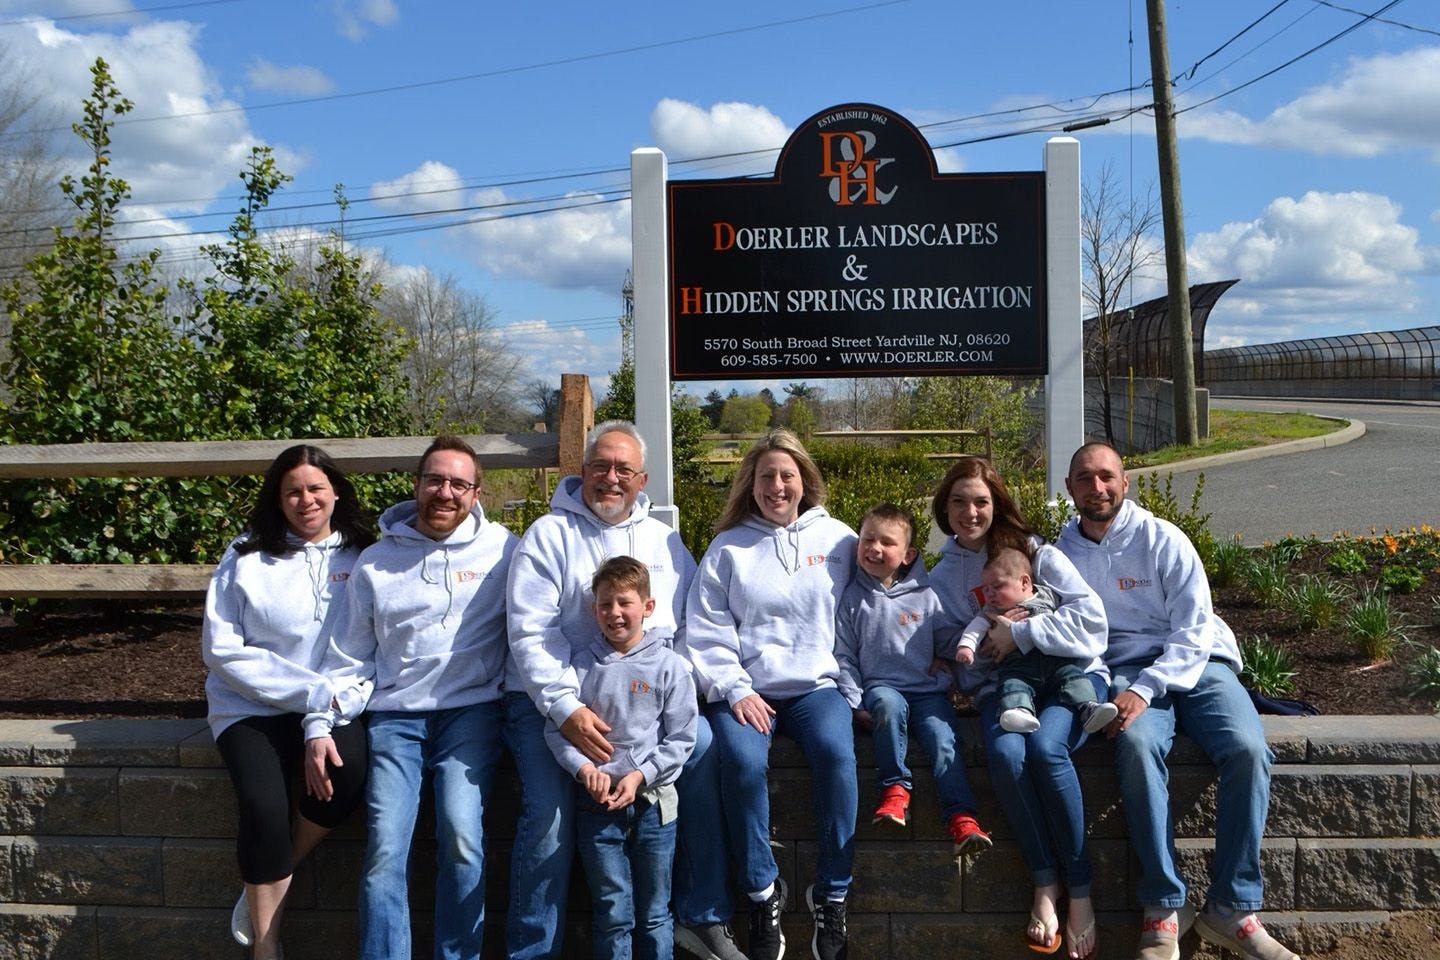 Gary Mozingo and his family sitting in front of the sign at the entrance of Doerler Landscapes & Hidden Springs Irrigation